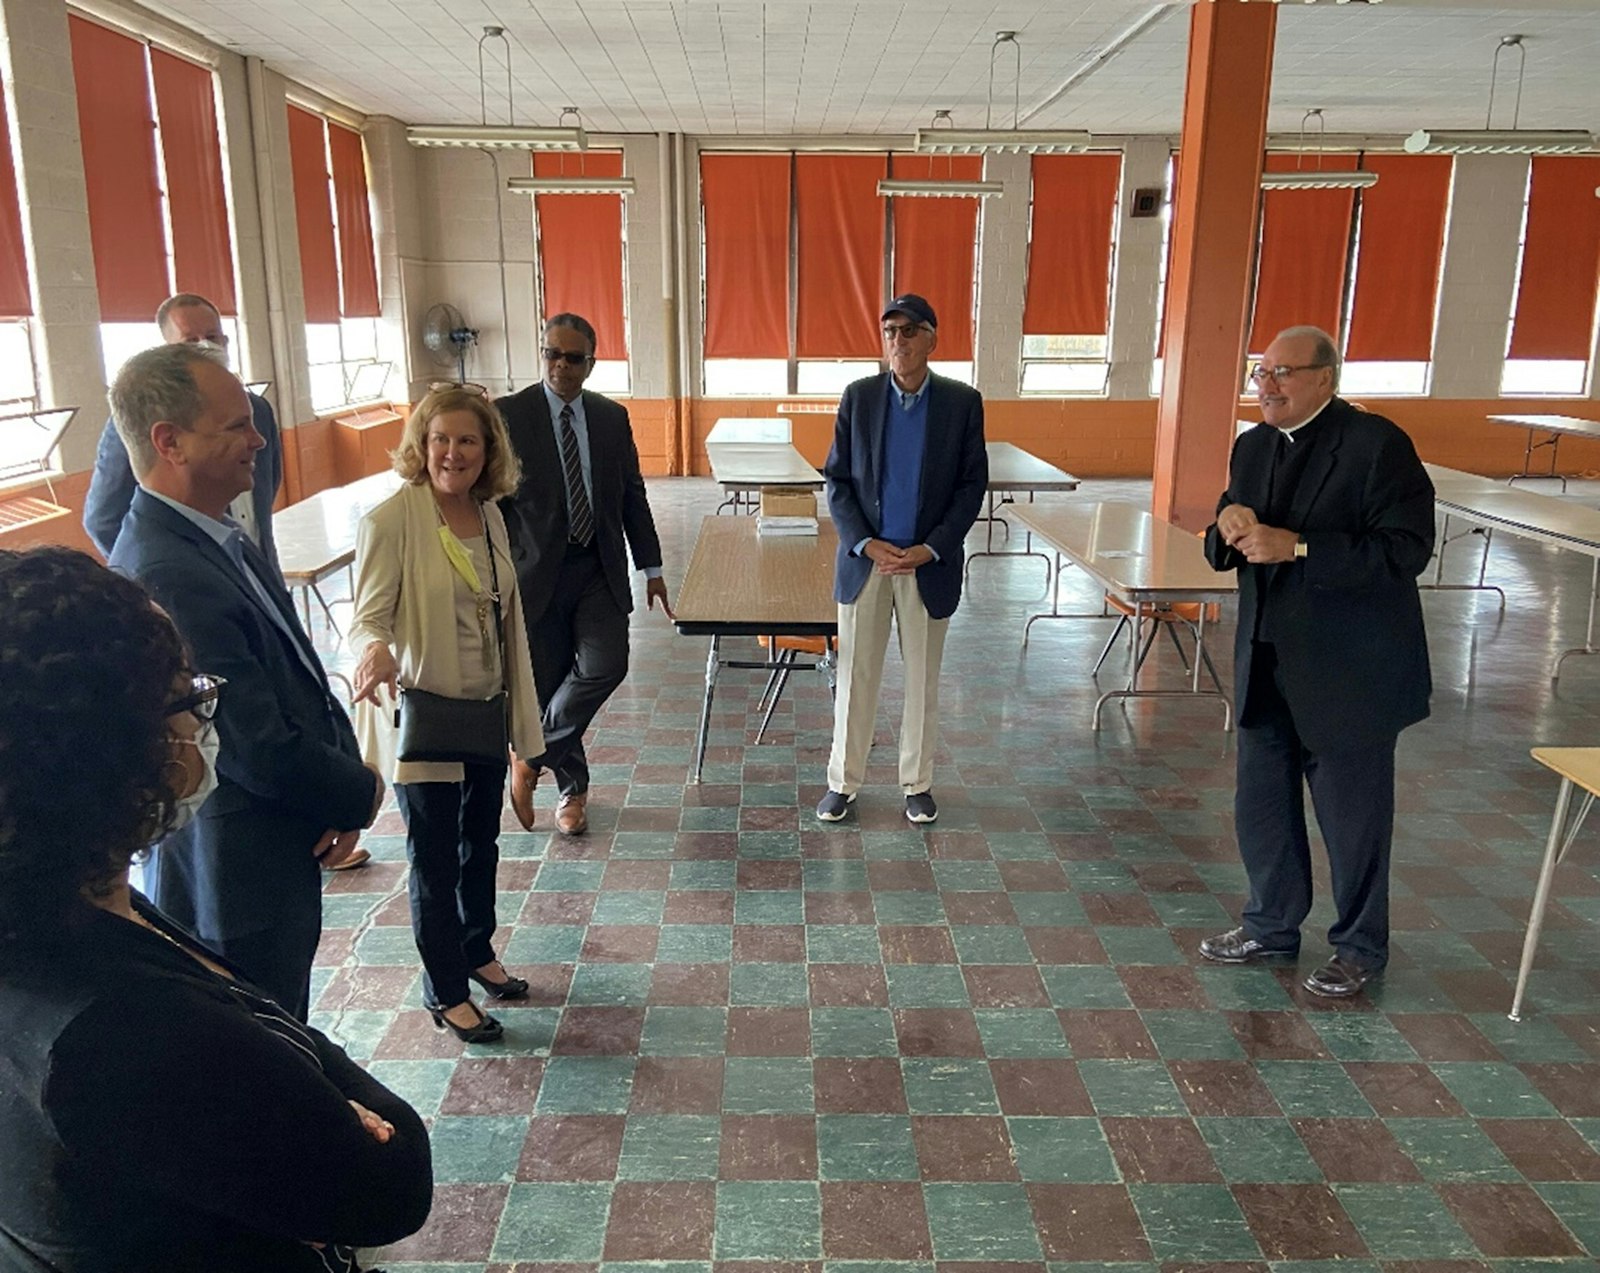 Fr. Duane Novelly, right, pastor of St. Matthew Parish in Detroit, gives Catholic Charities officials and other partners a tour of the former school building, which has been vacant since 2008. (Courtesy of St. Matthew Parish)